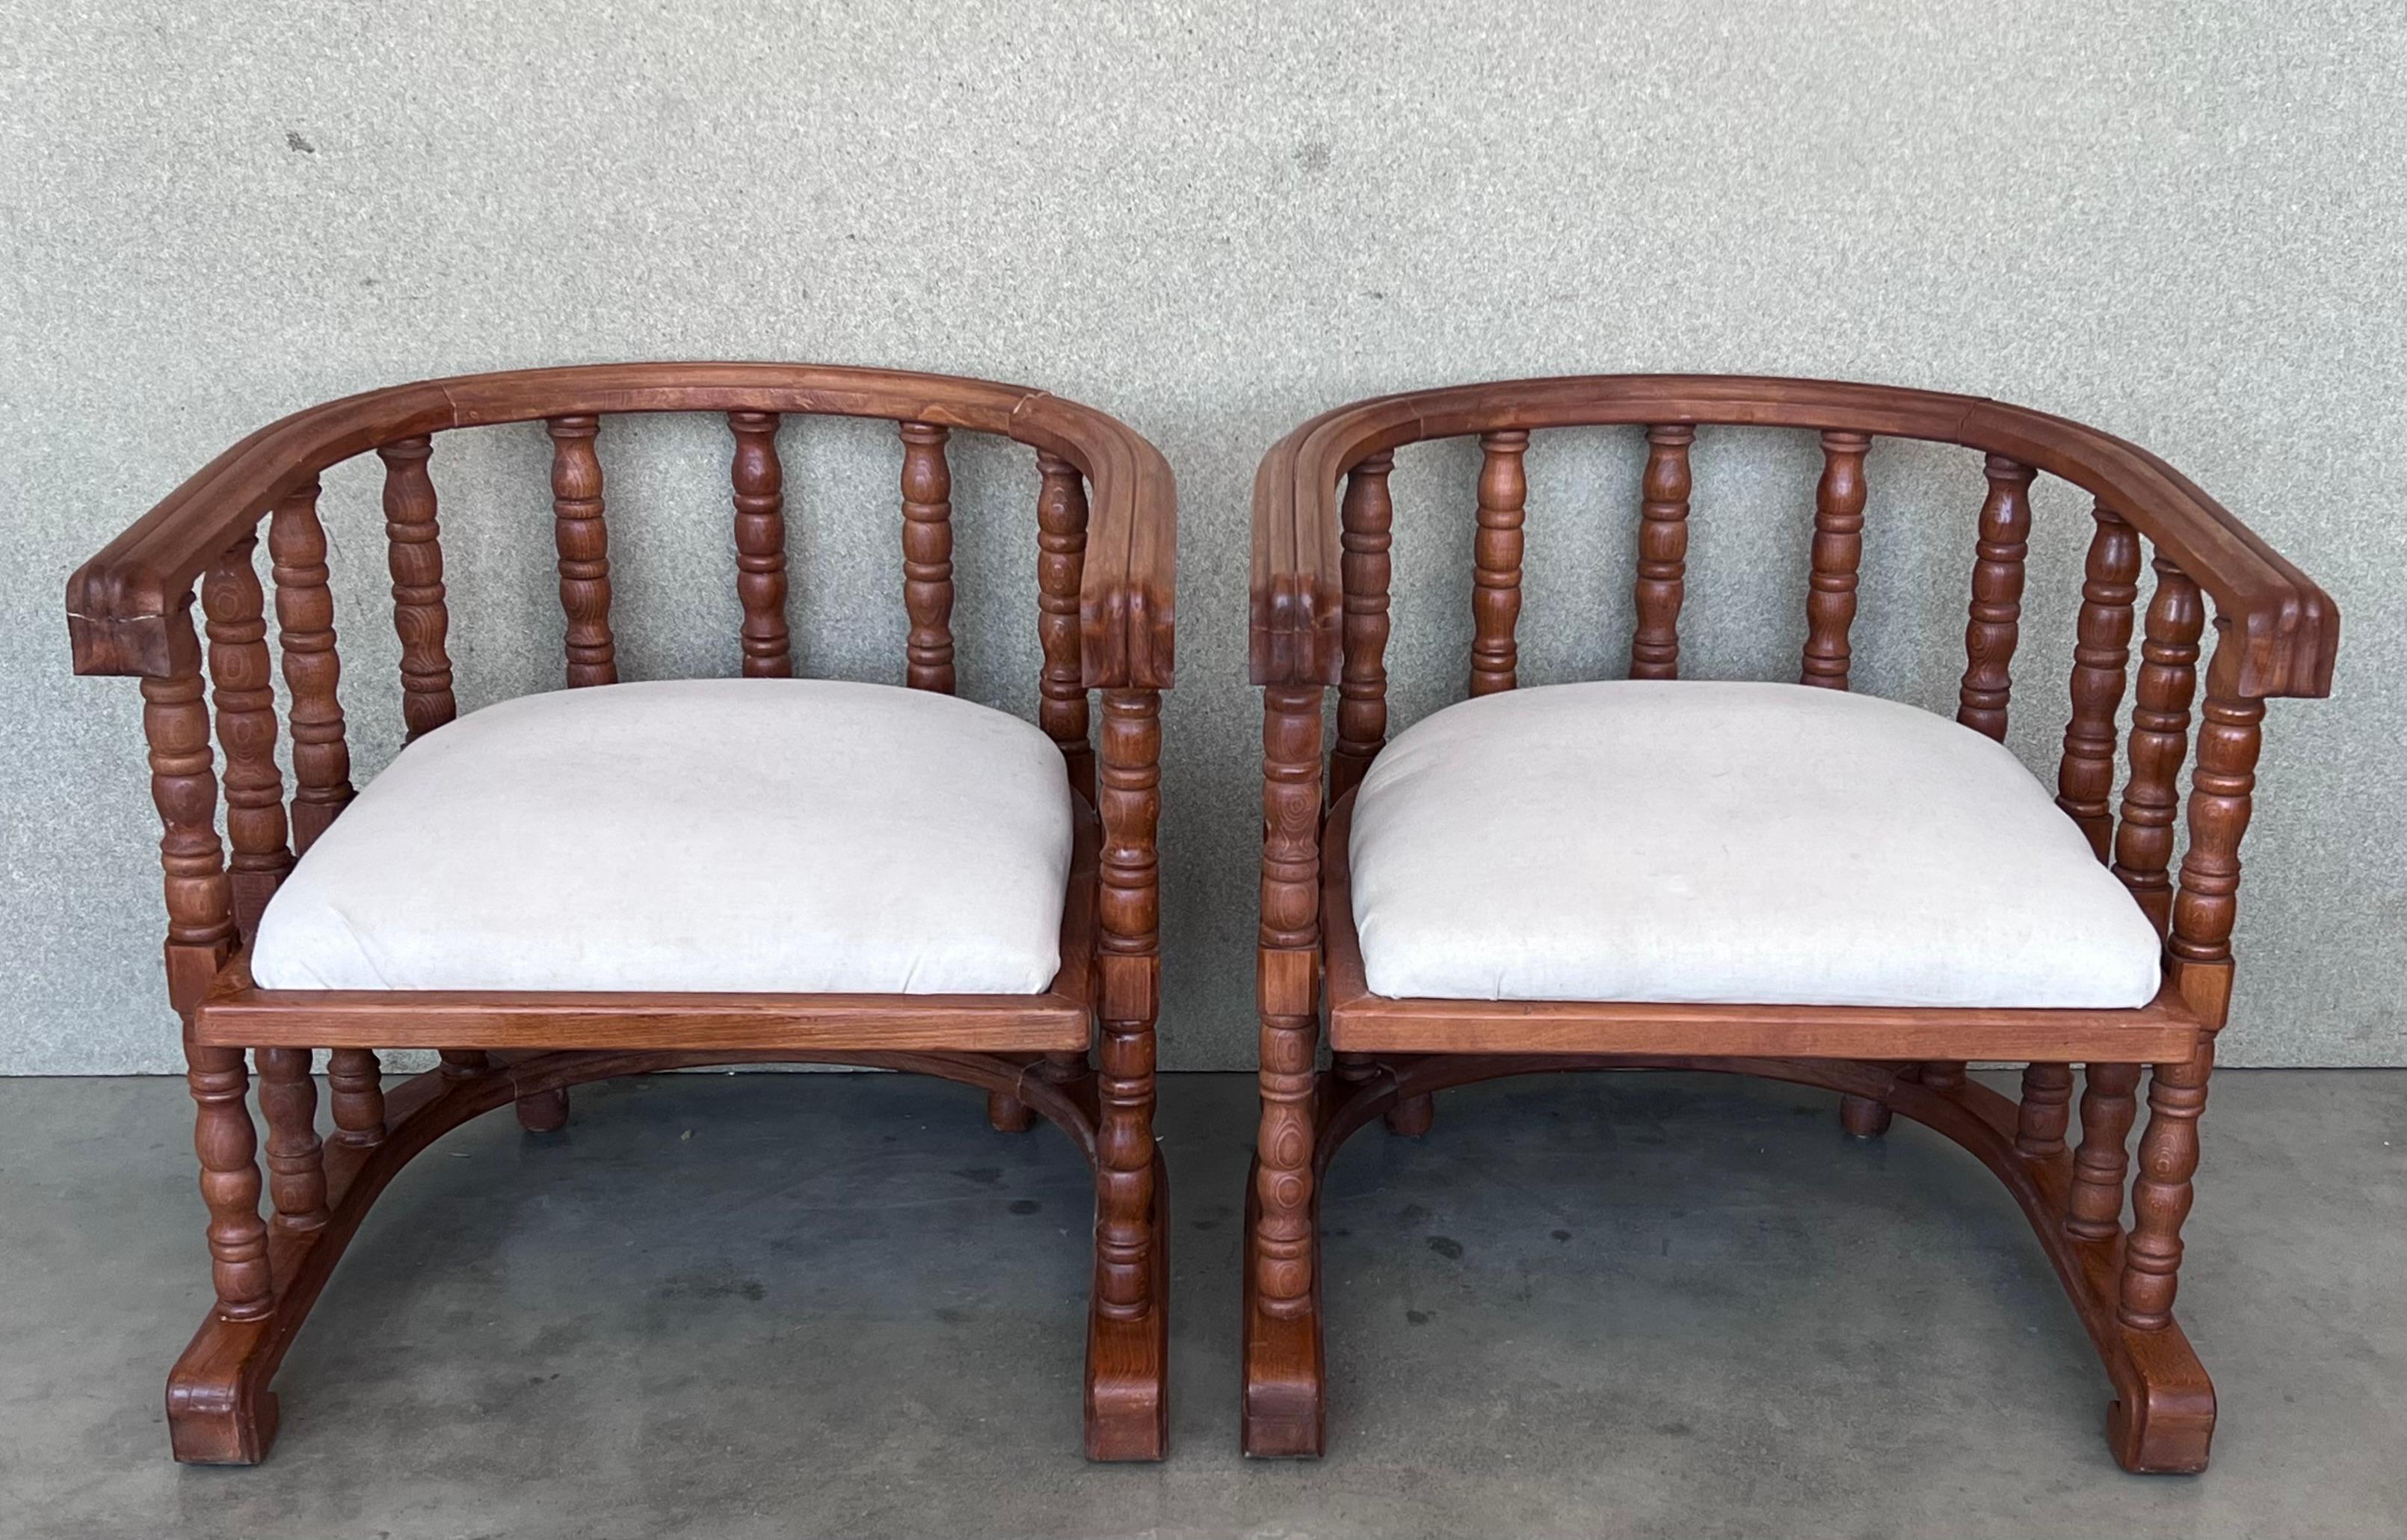 Recently restored pair of vintage walnut framed barrel back chairs with white upholstery.